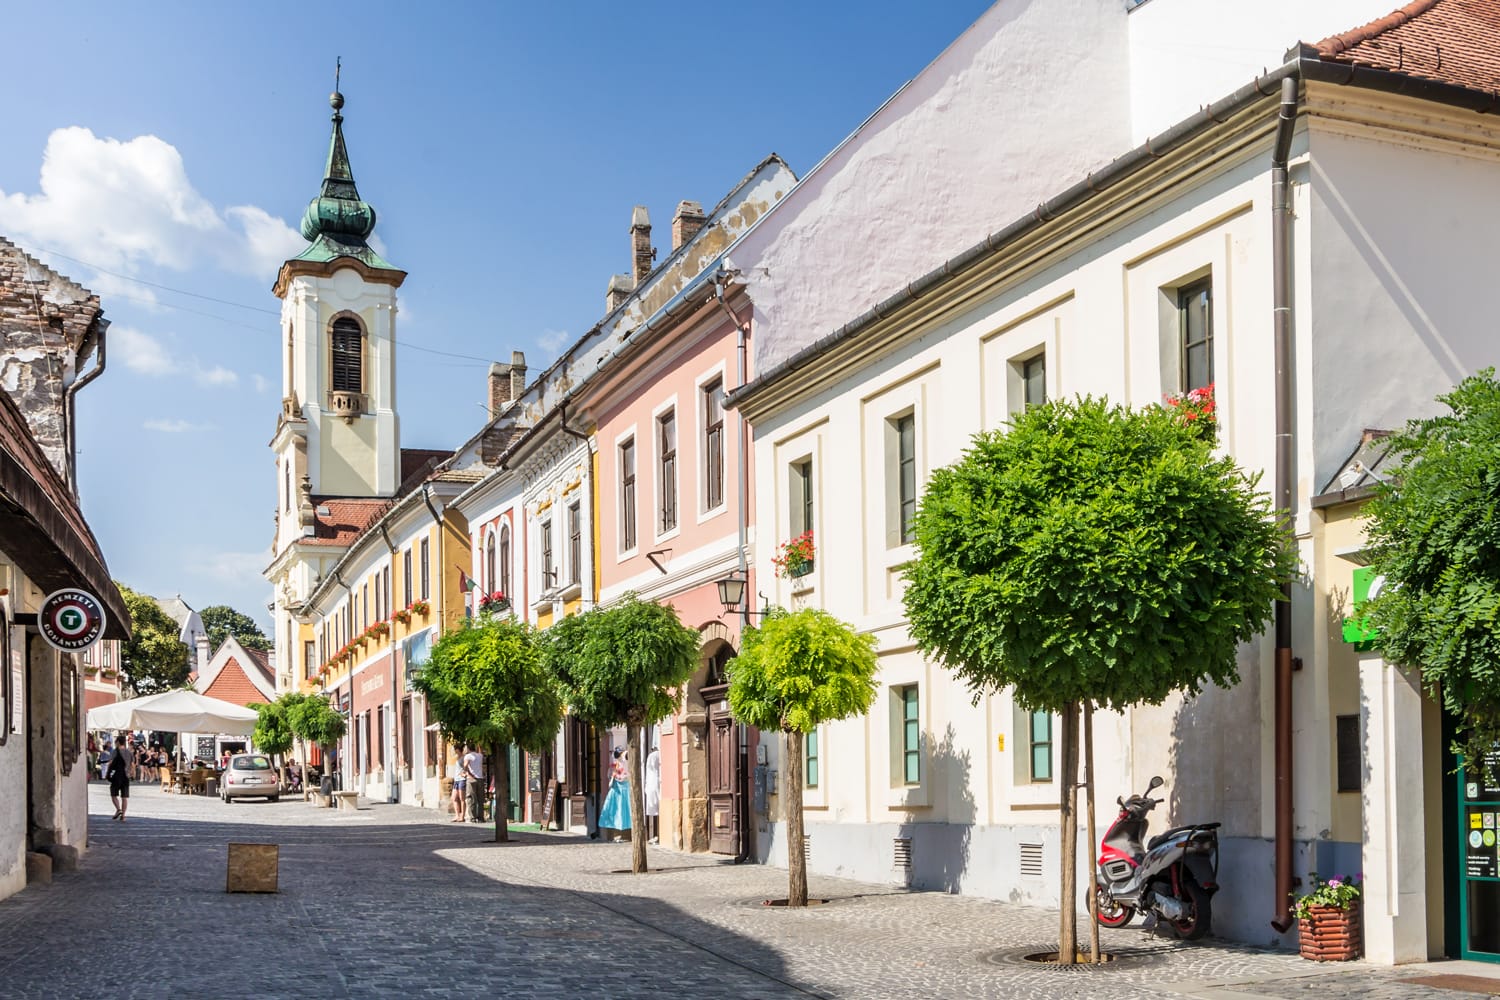 Shops and restaurants at the centre of Szentendre, Hungary